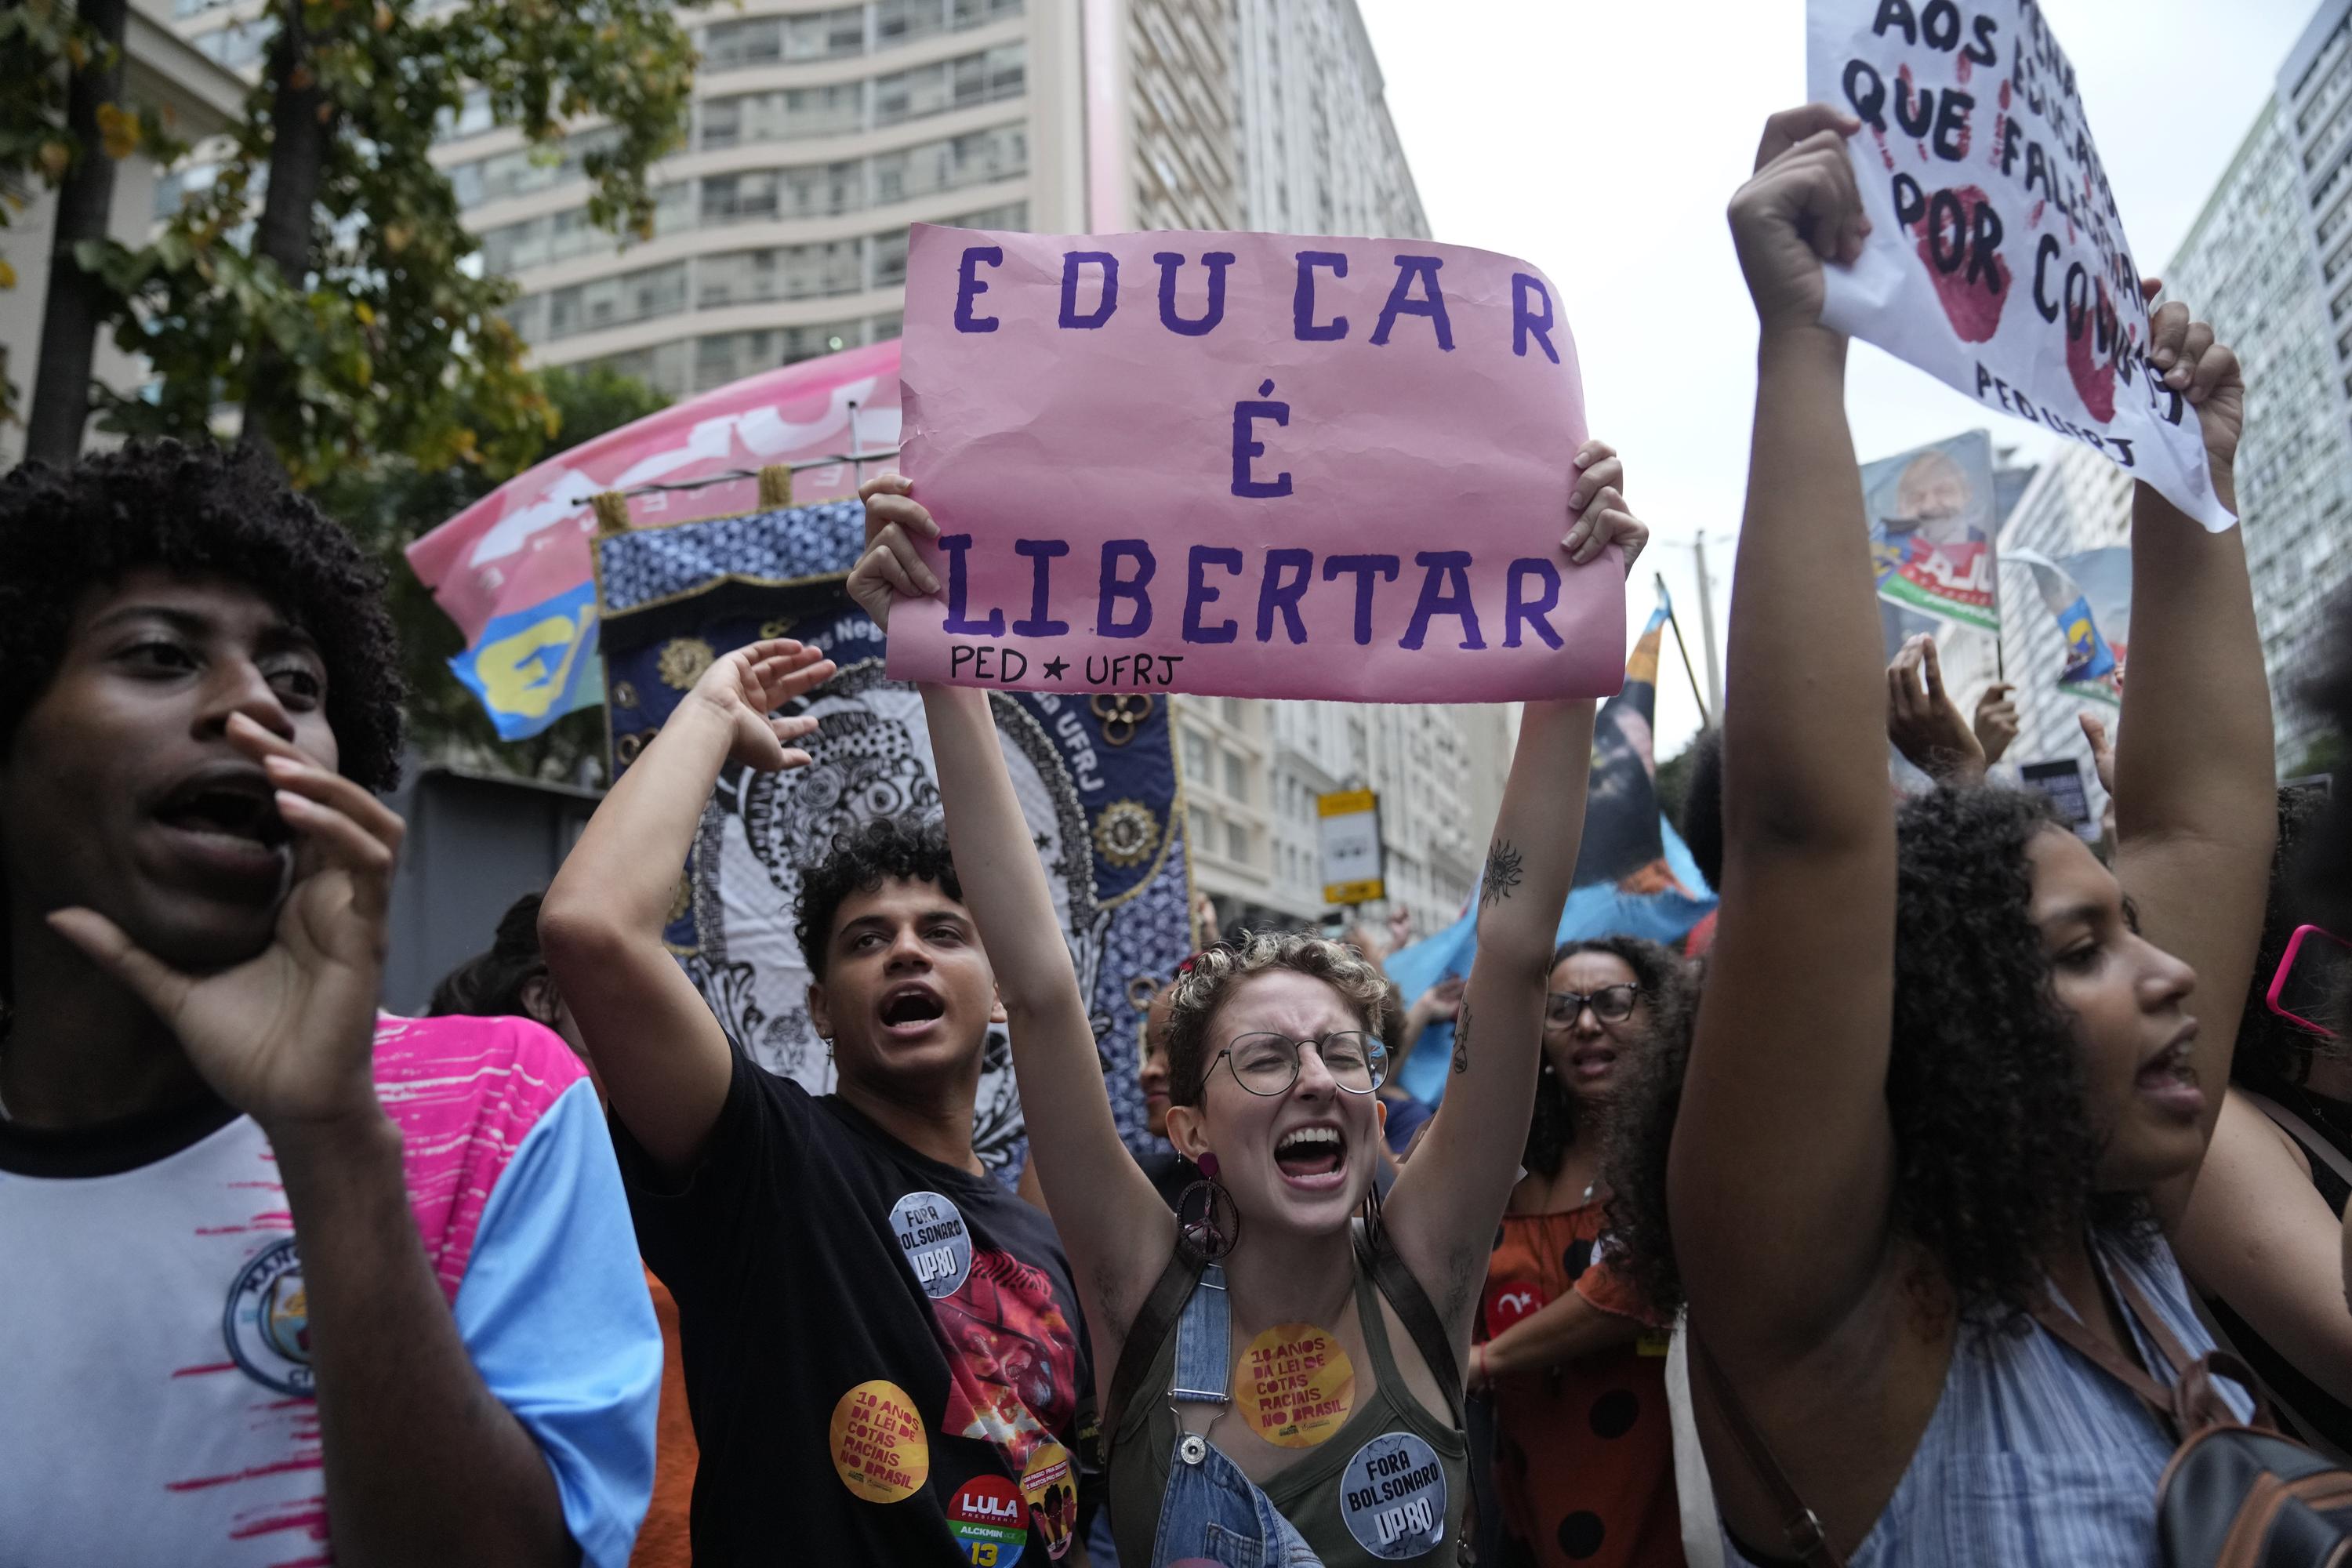 Attacks on student activism is an indicator of democratic backsliding